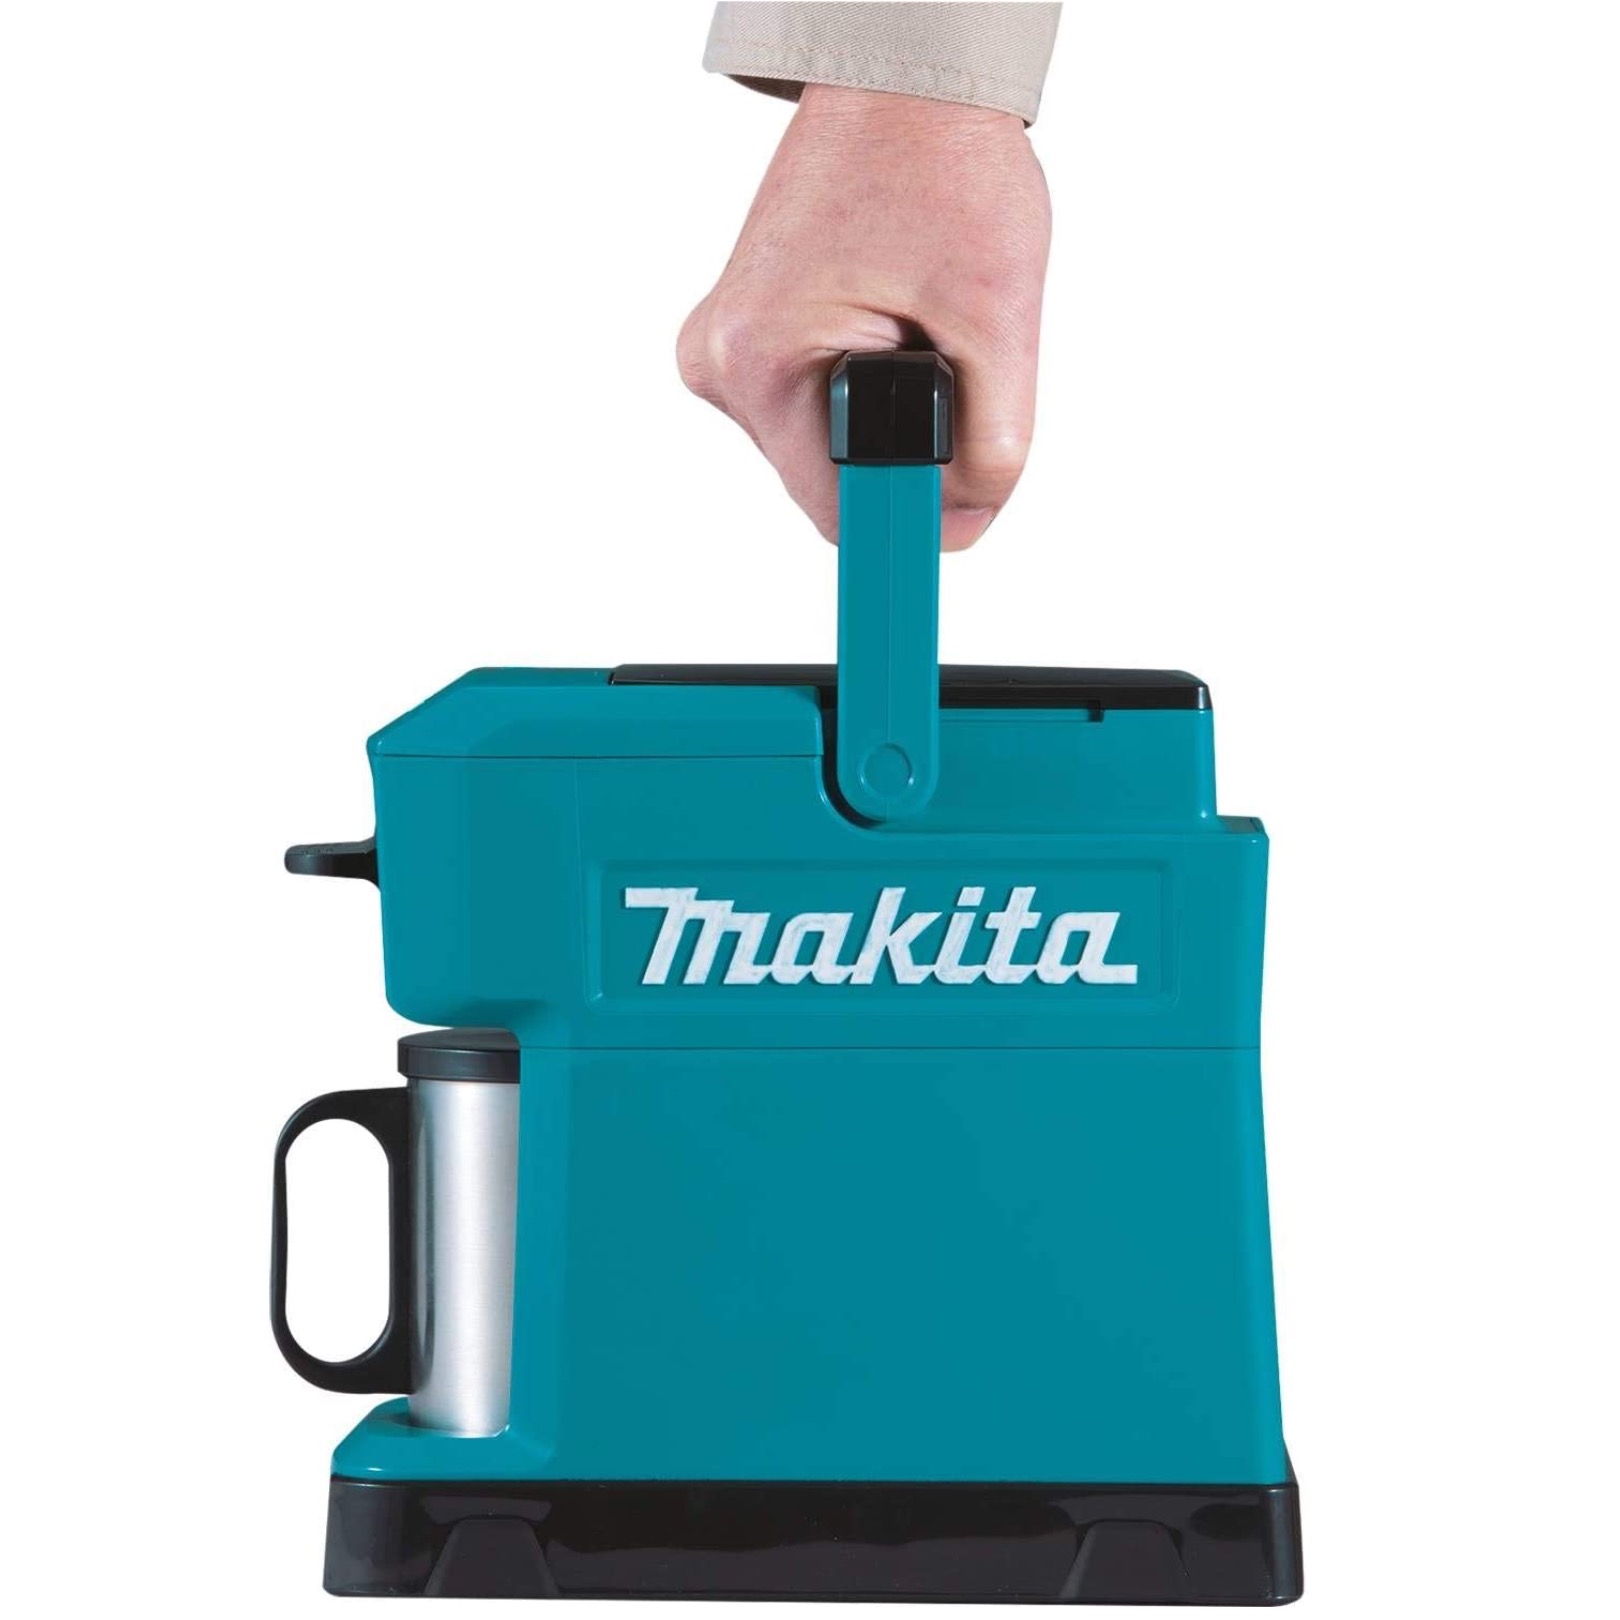 makita-lithium-ion-cordless-coffee-maker-carry-handle